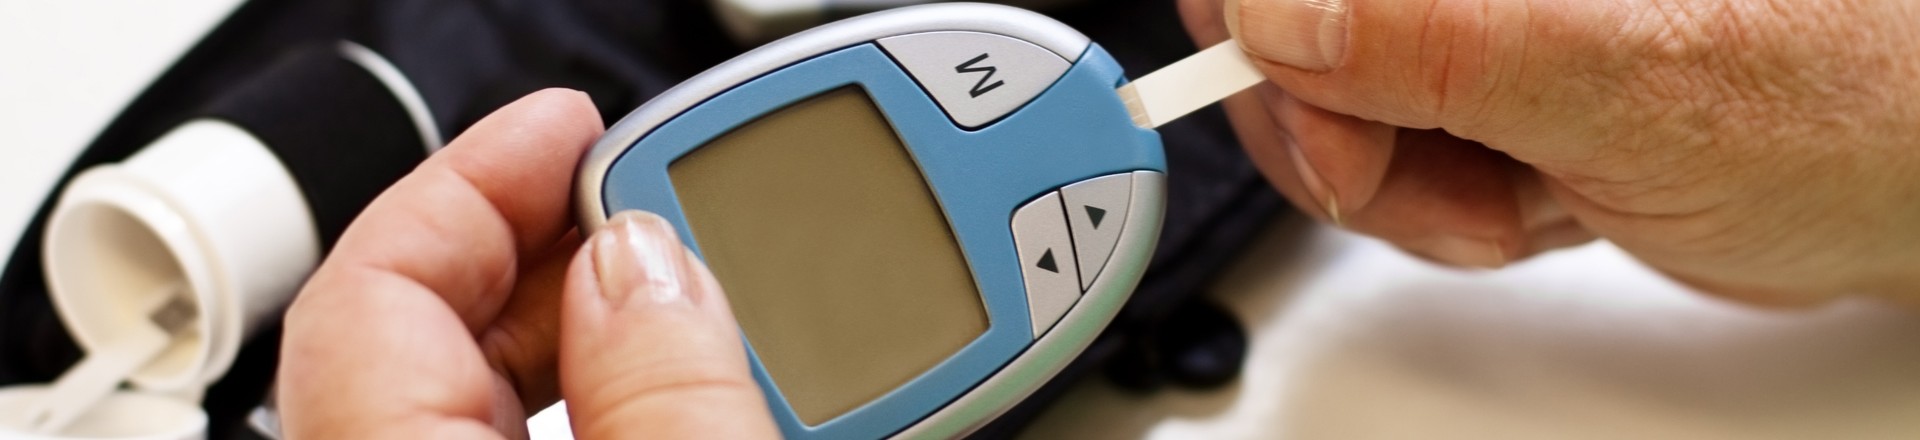 diabetes incidence is on the rise